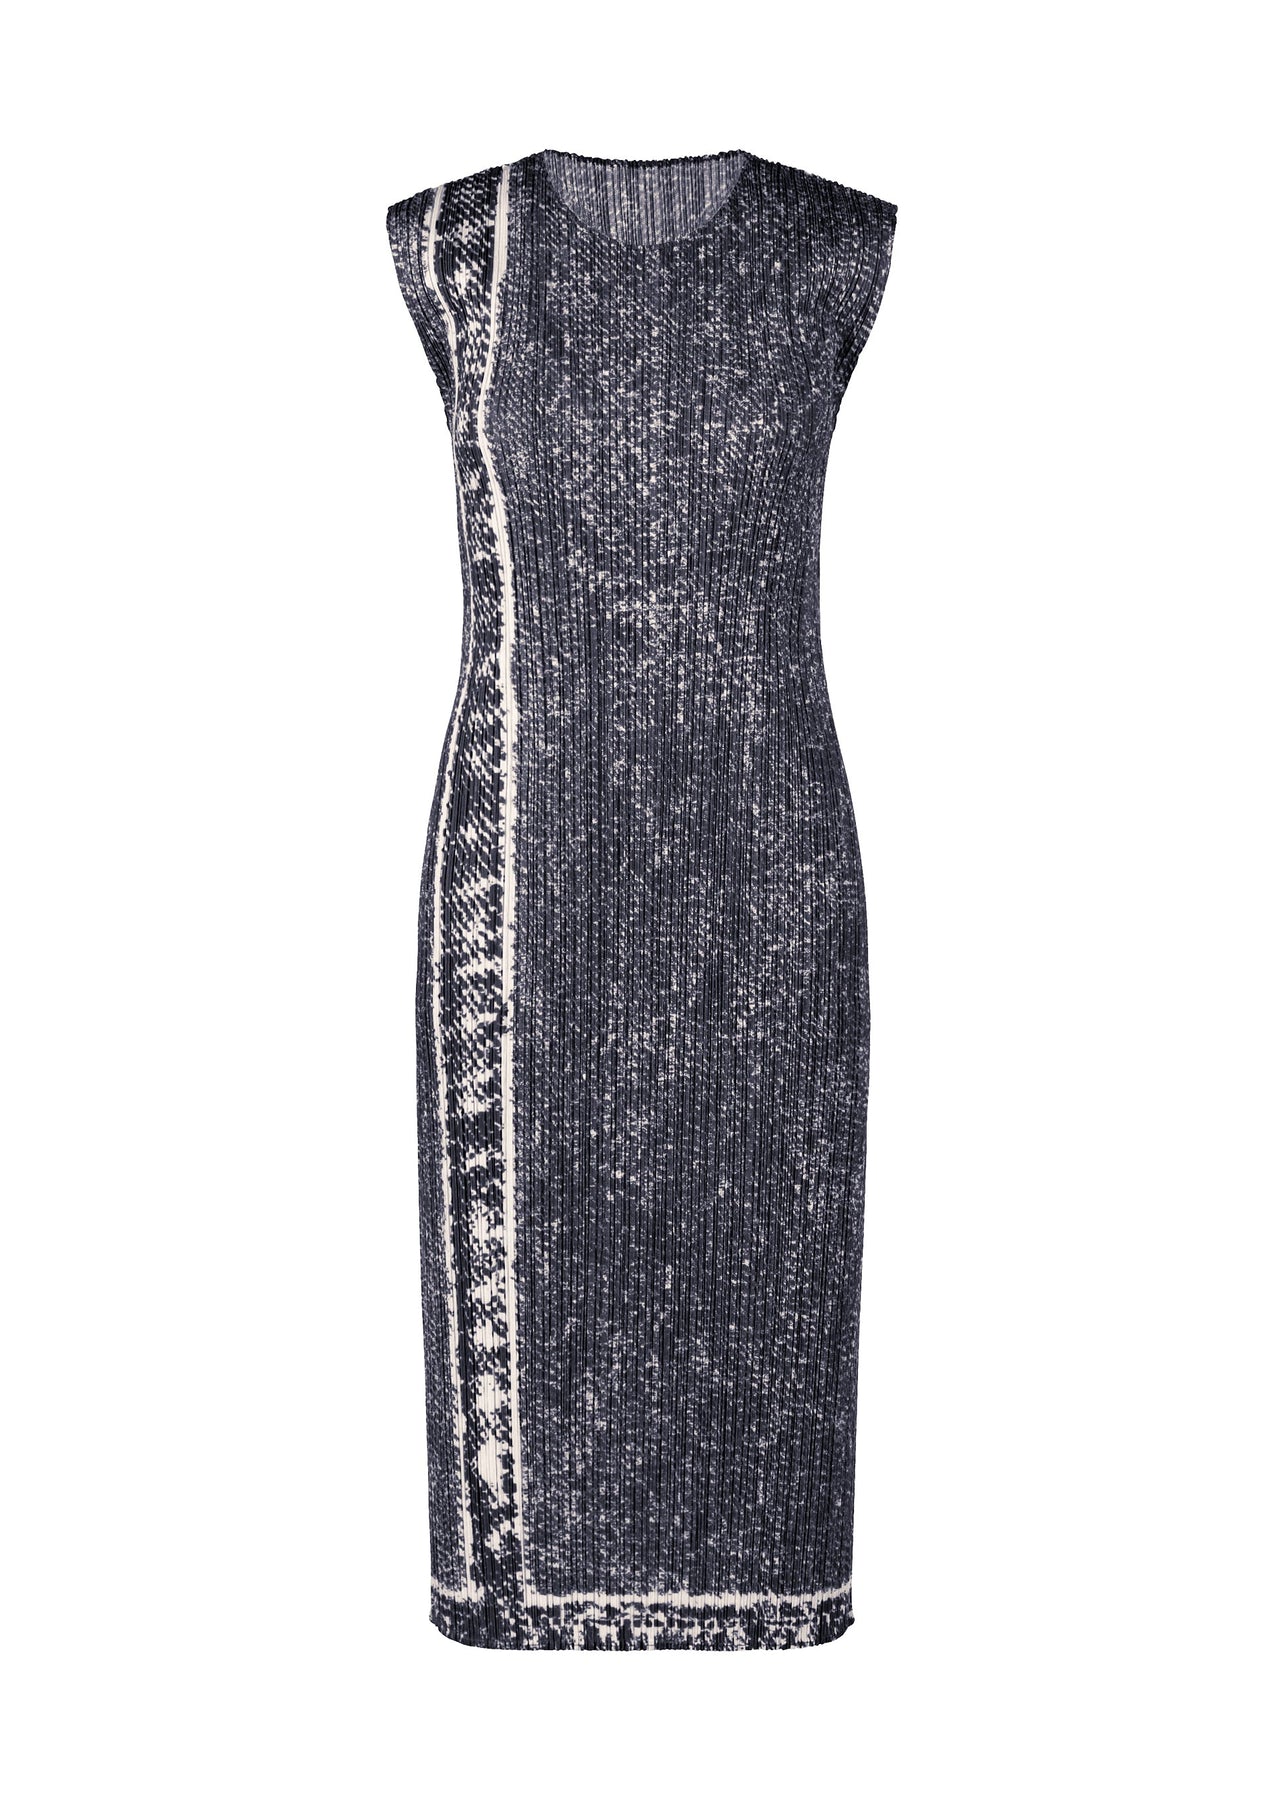 TRAIL DENIM DRESS | The official ISSEY MIYAKE ONLINE STORE | ISSEY